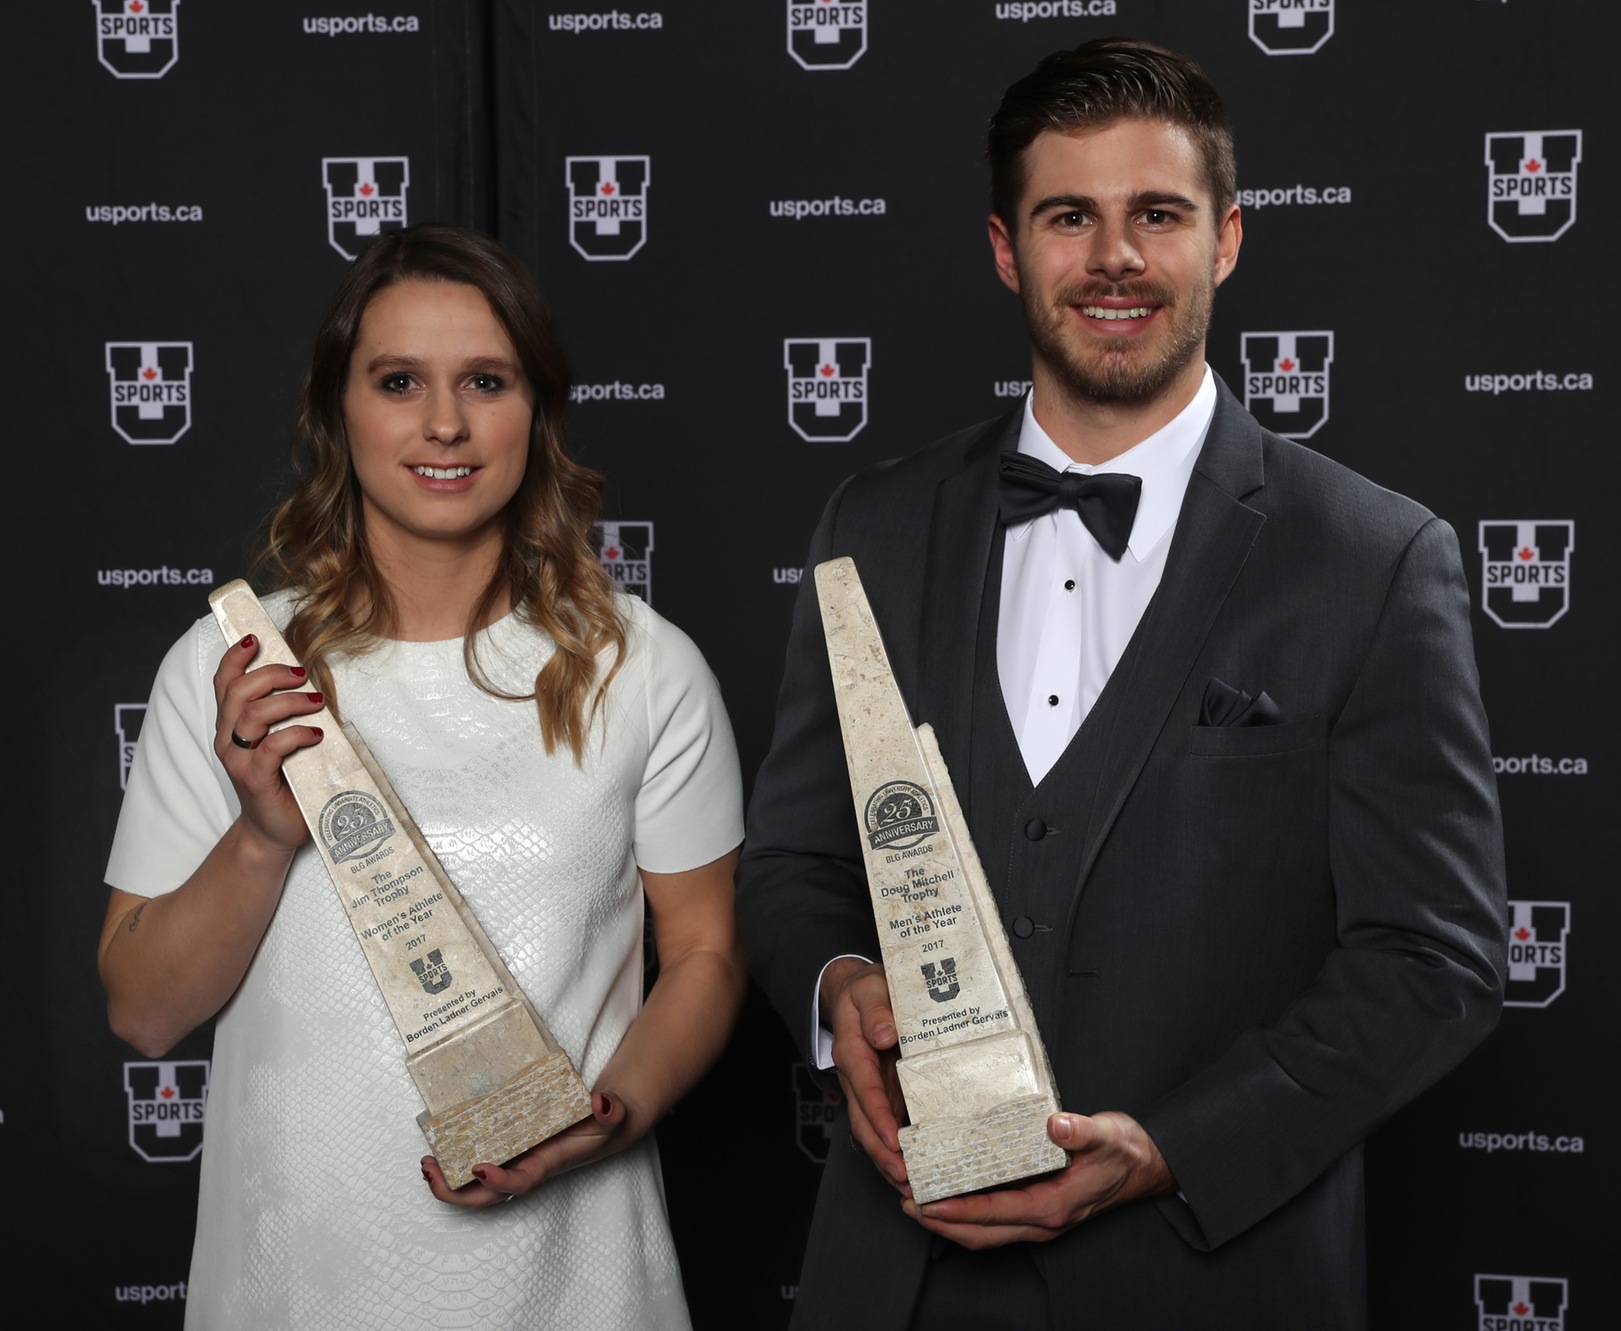 25th BLG Awards: Laval’s Roy-Petitclerc, UNB’s Maillet named U SPORTS Athletes of the Year